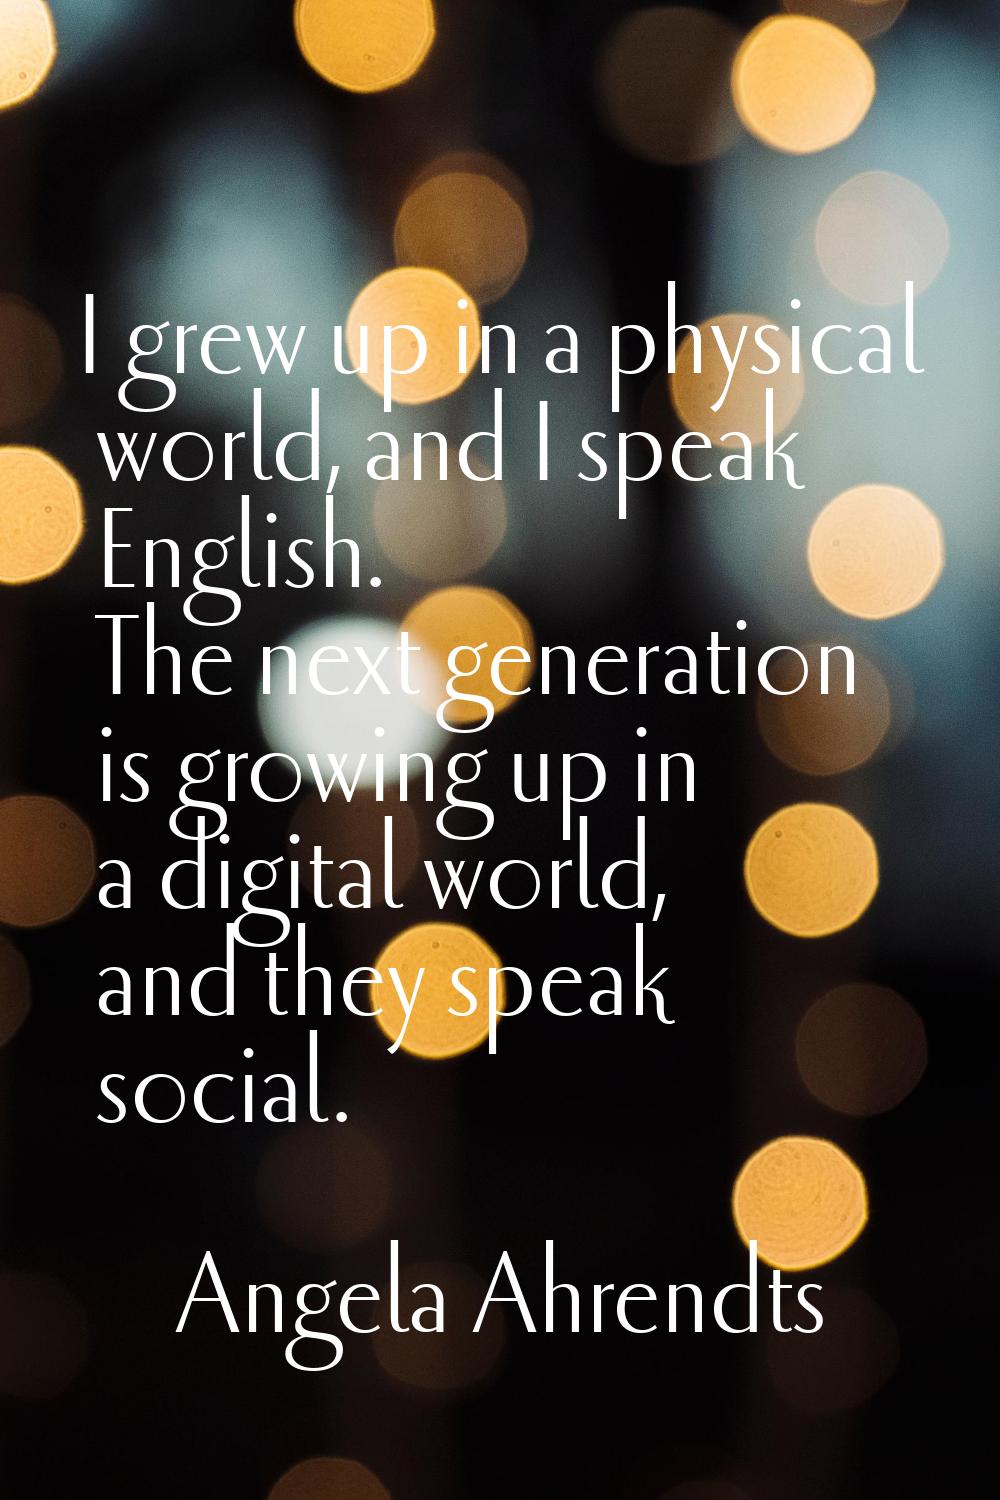 I grew up in a physical world, and I speak English. The next generation is growing up in a digital 